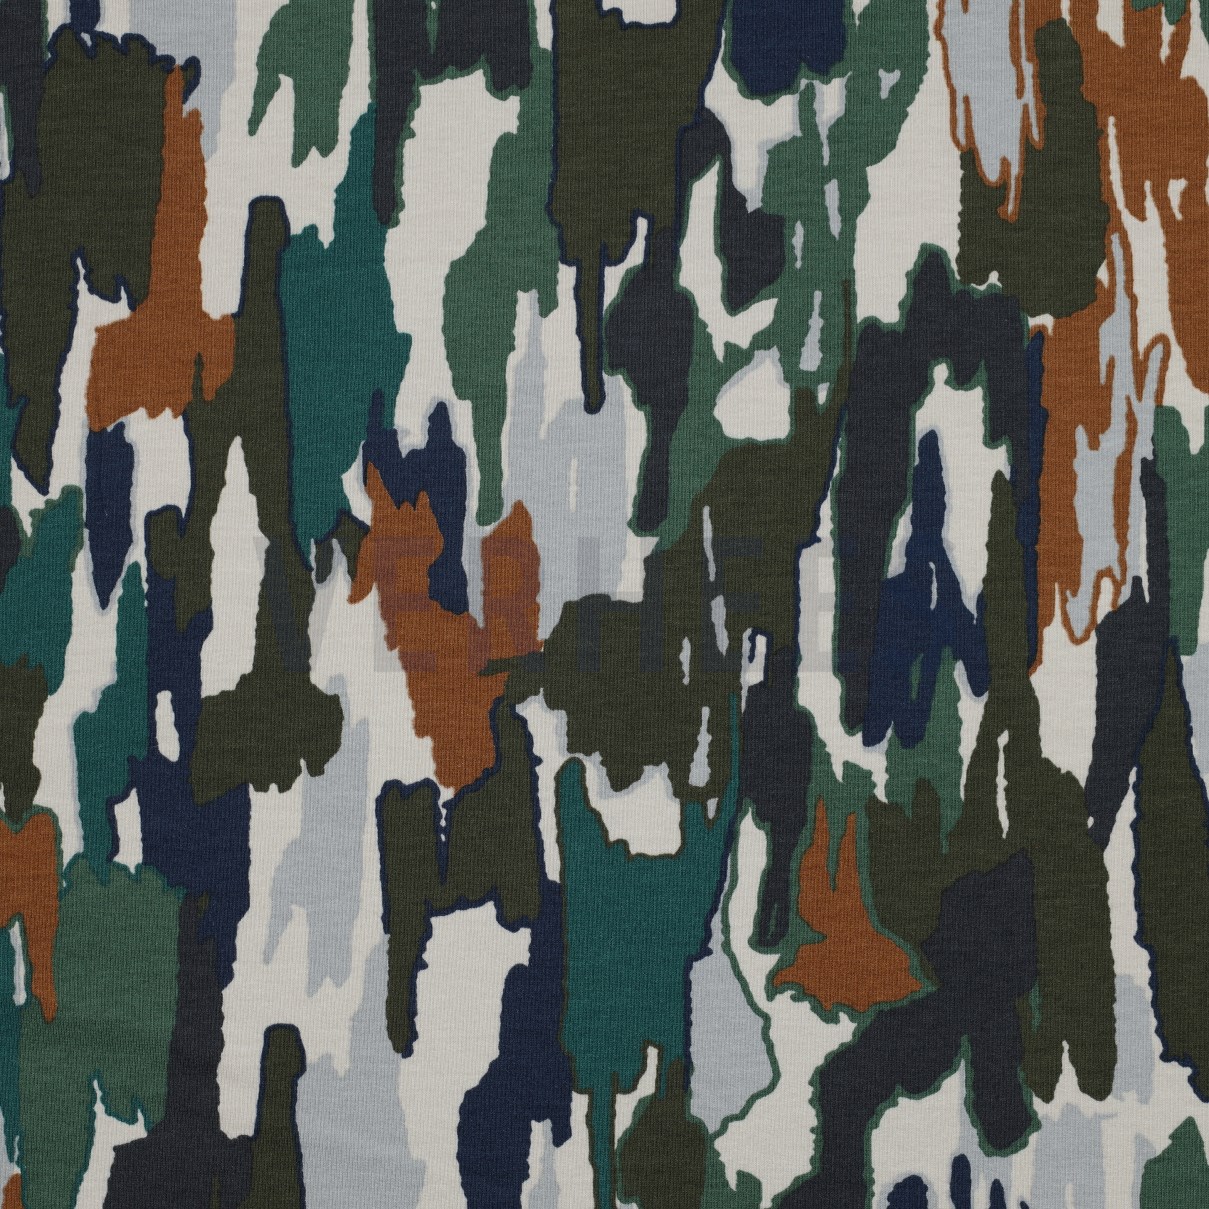 SOFT SWEAT ABSTRACT PAINT ARMY GREEN (high resolution)